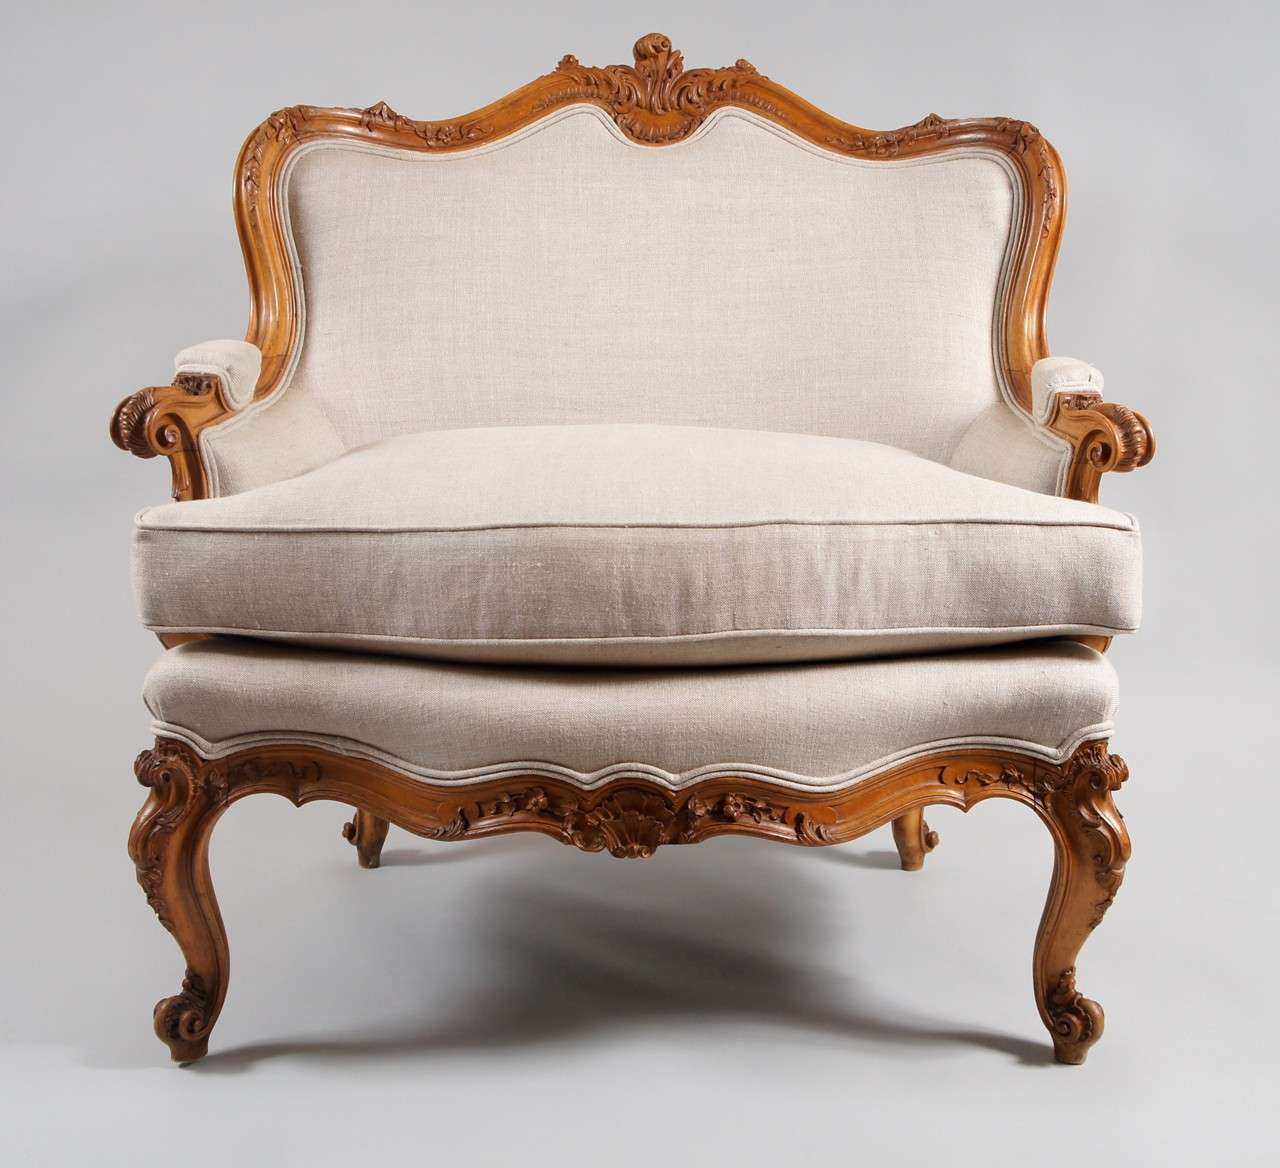 Oversized upholstered armchair.
Recently upholstered in French linen.